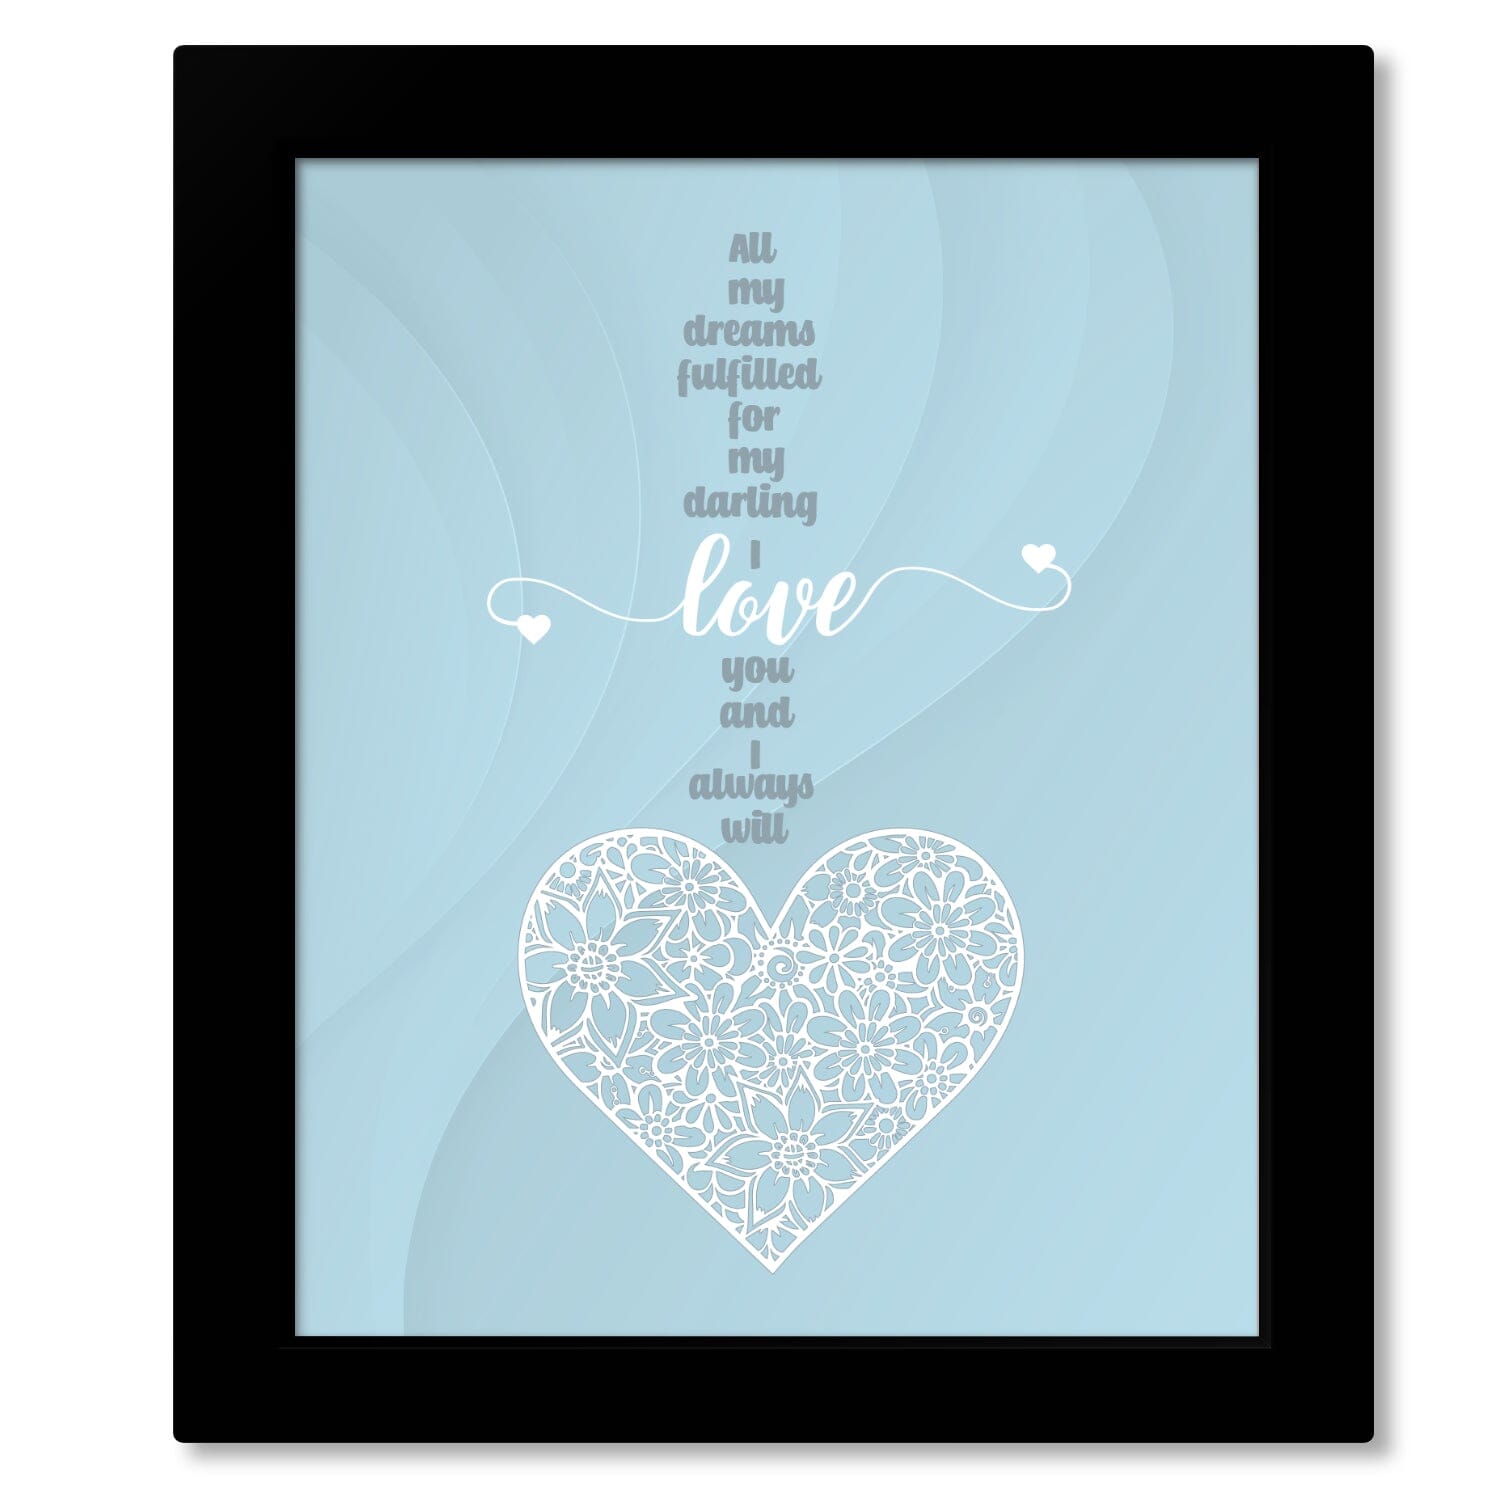 Love Me Tender by Elvis Presley - Wedding Song Lyric Print Song Lyrics Art Song Lyrics Art 16x20 Framed Print (without mat) 